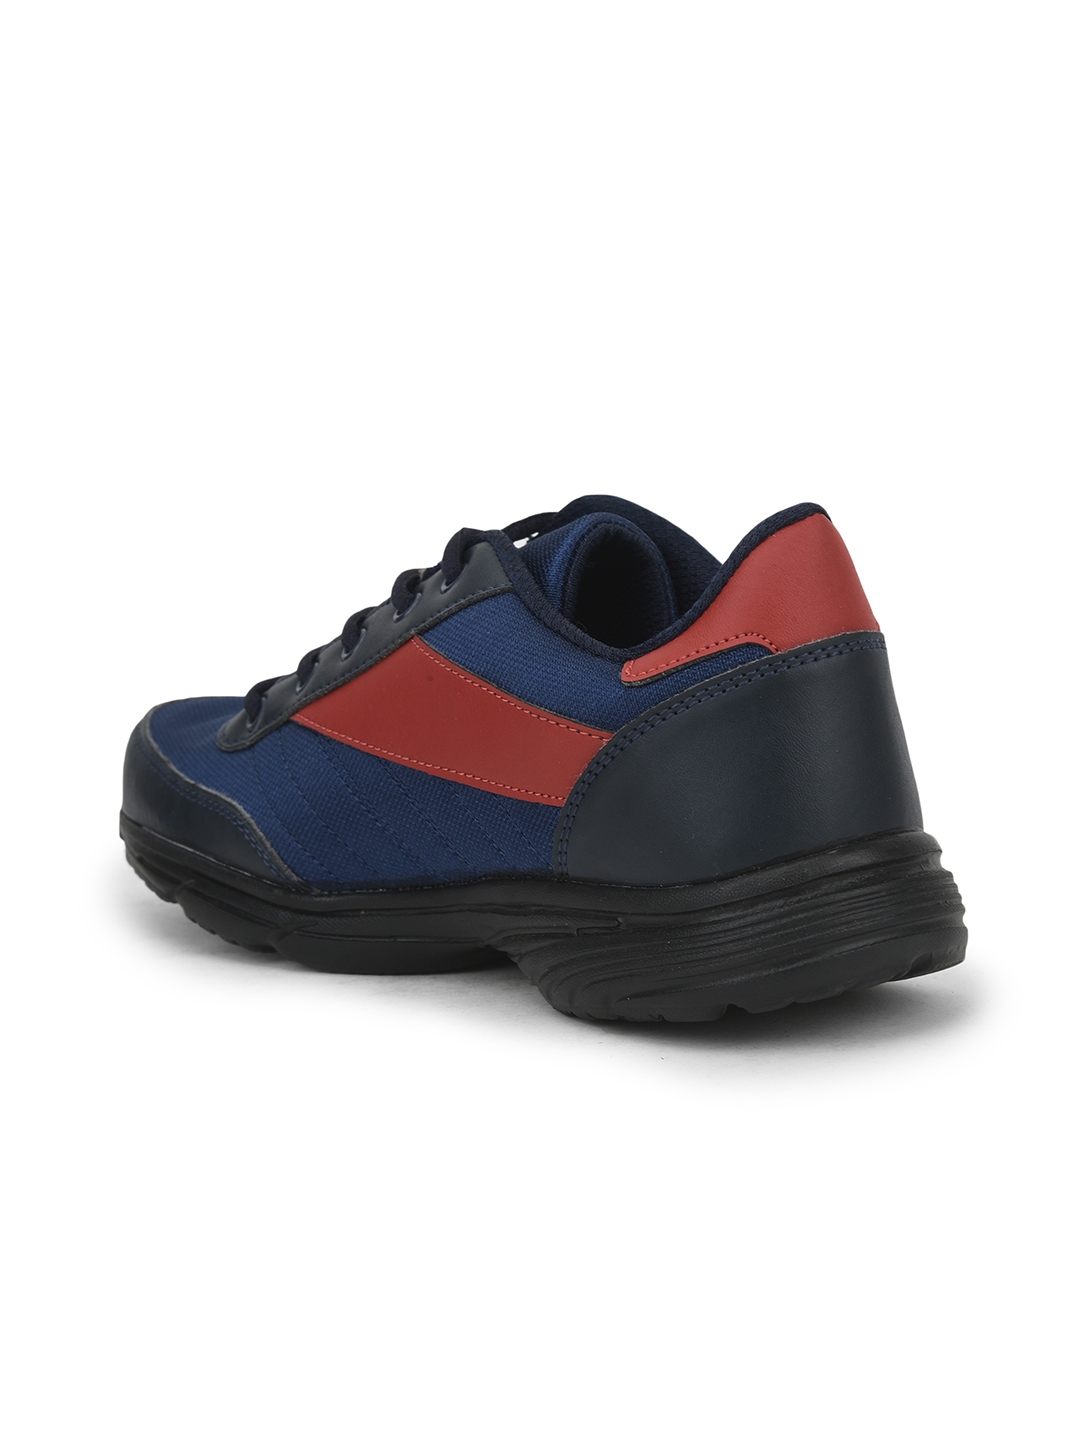 Liberty | Force 10 by Liberty RED Casual Shoes 9907-51BLU 1199 For :- Men